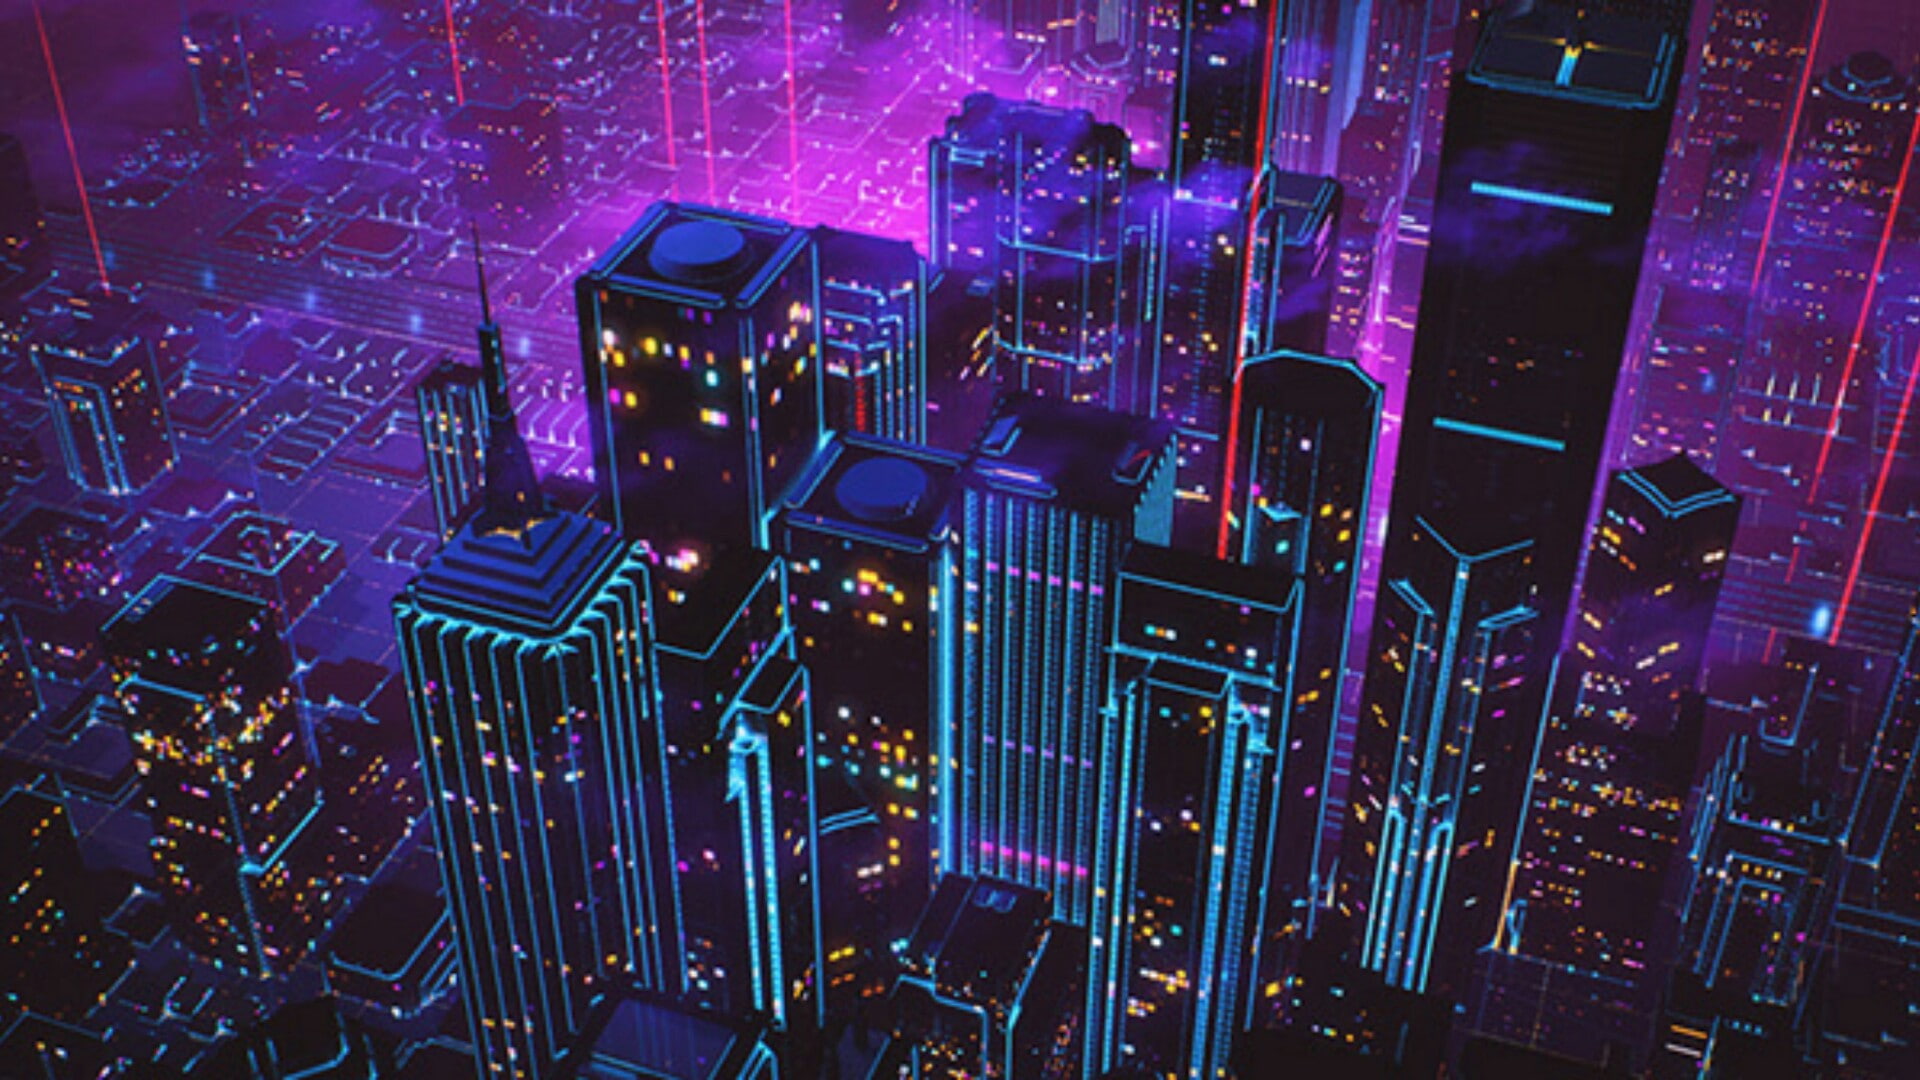 special effects, city lights, artwork, electricity, psychedelic art